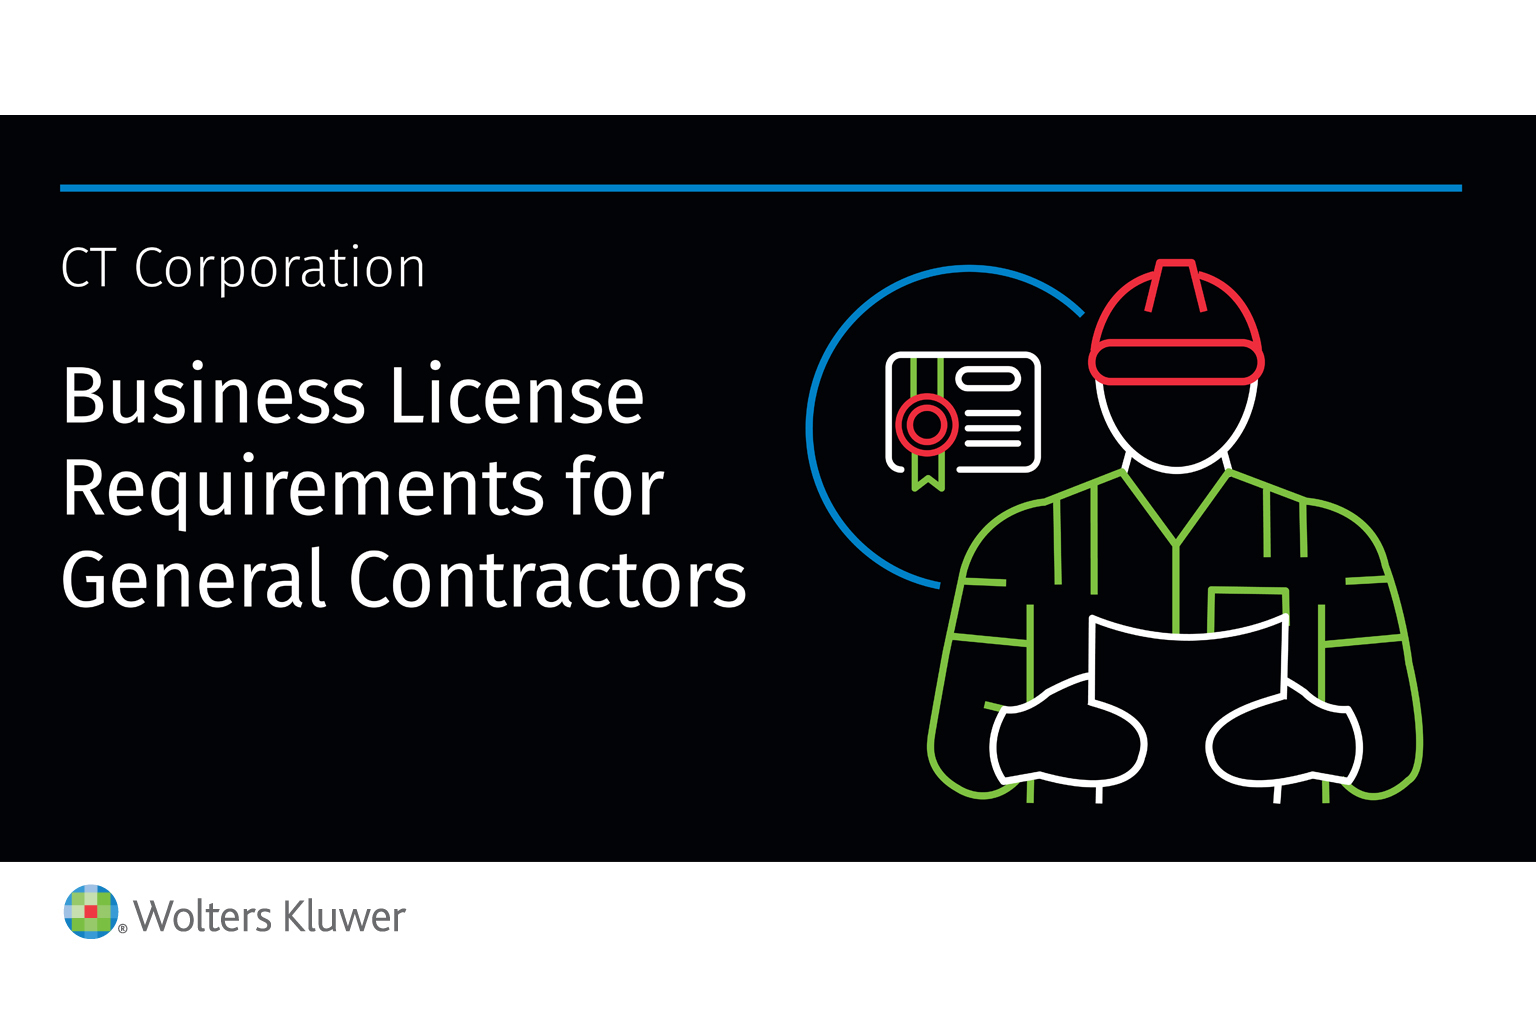 General contracting business license information from CT Corporation